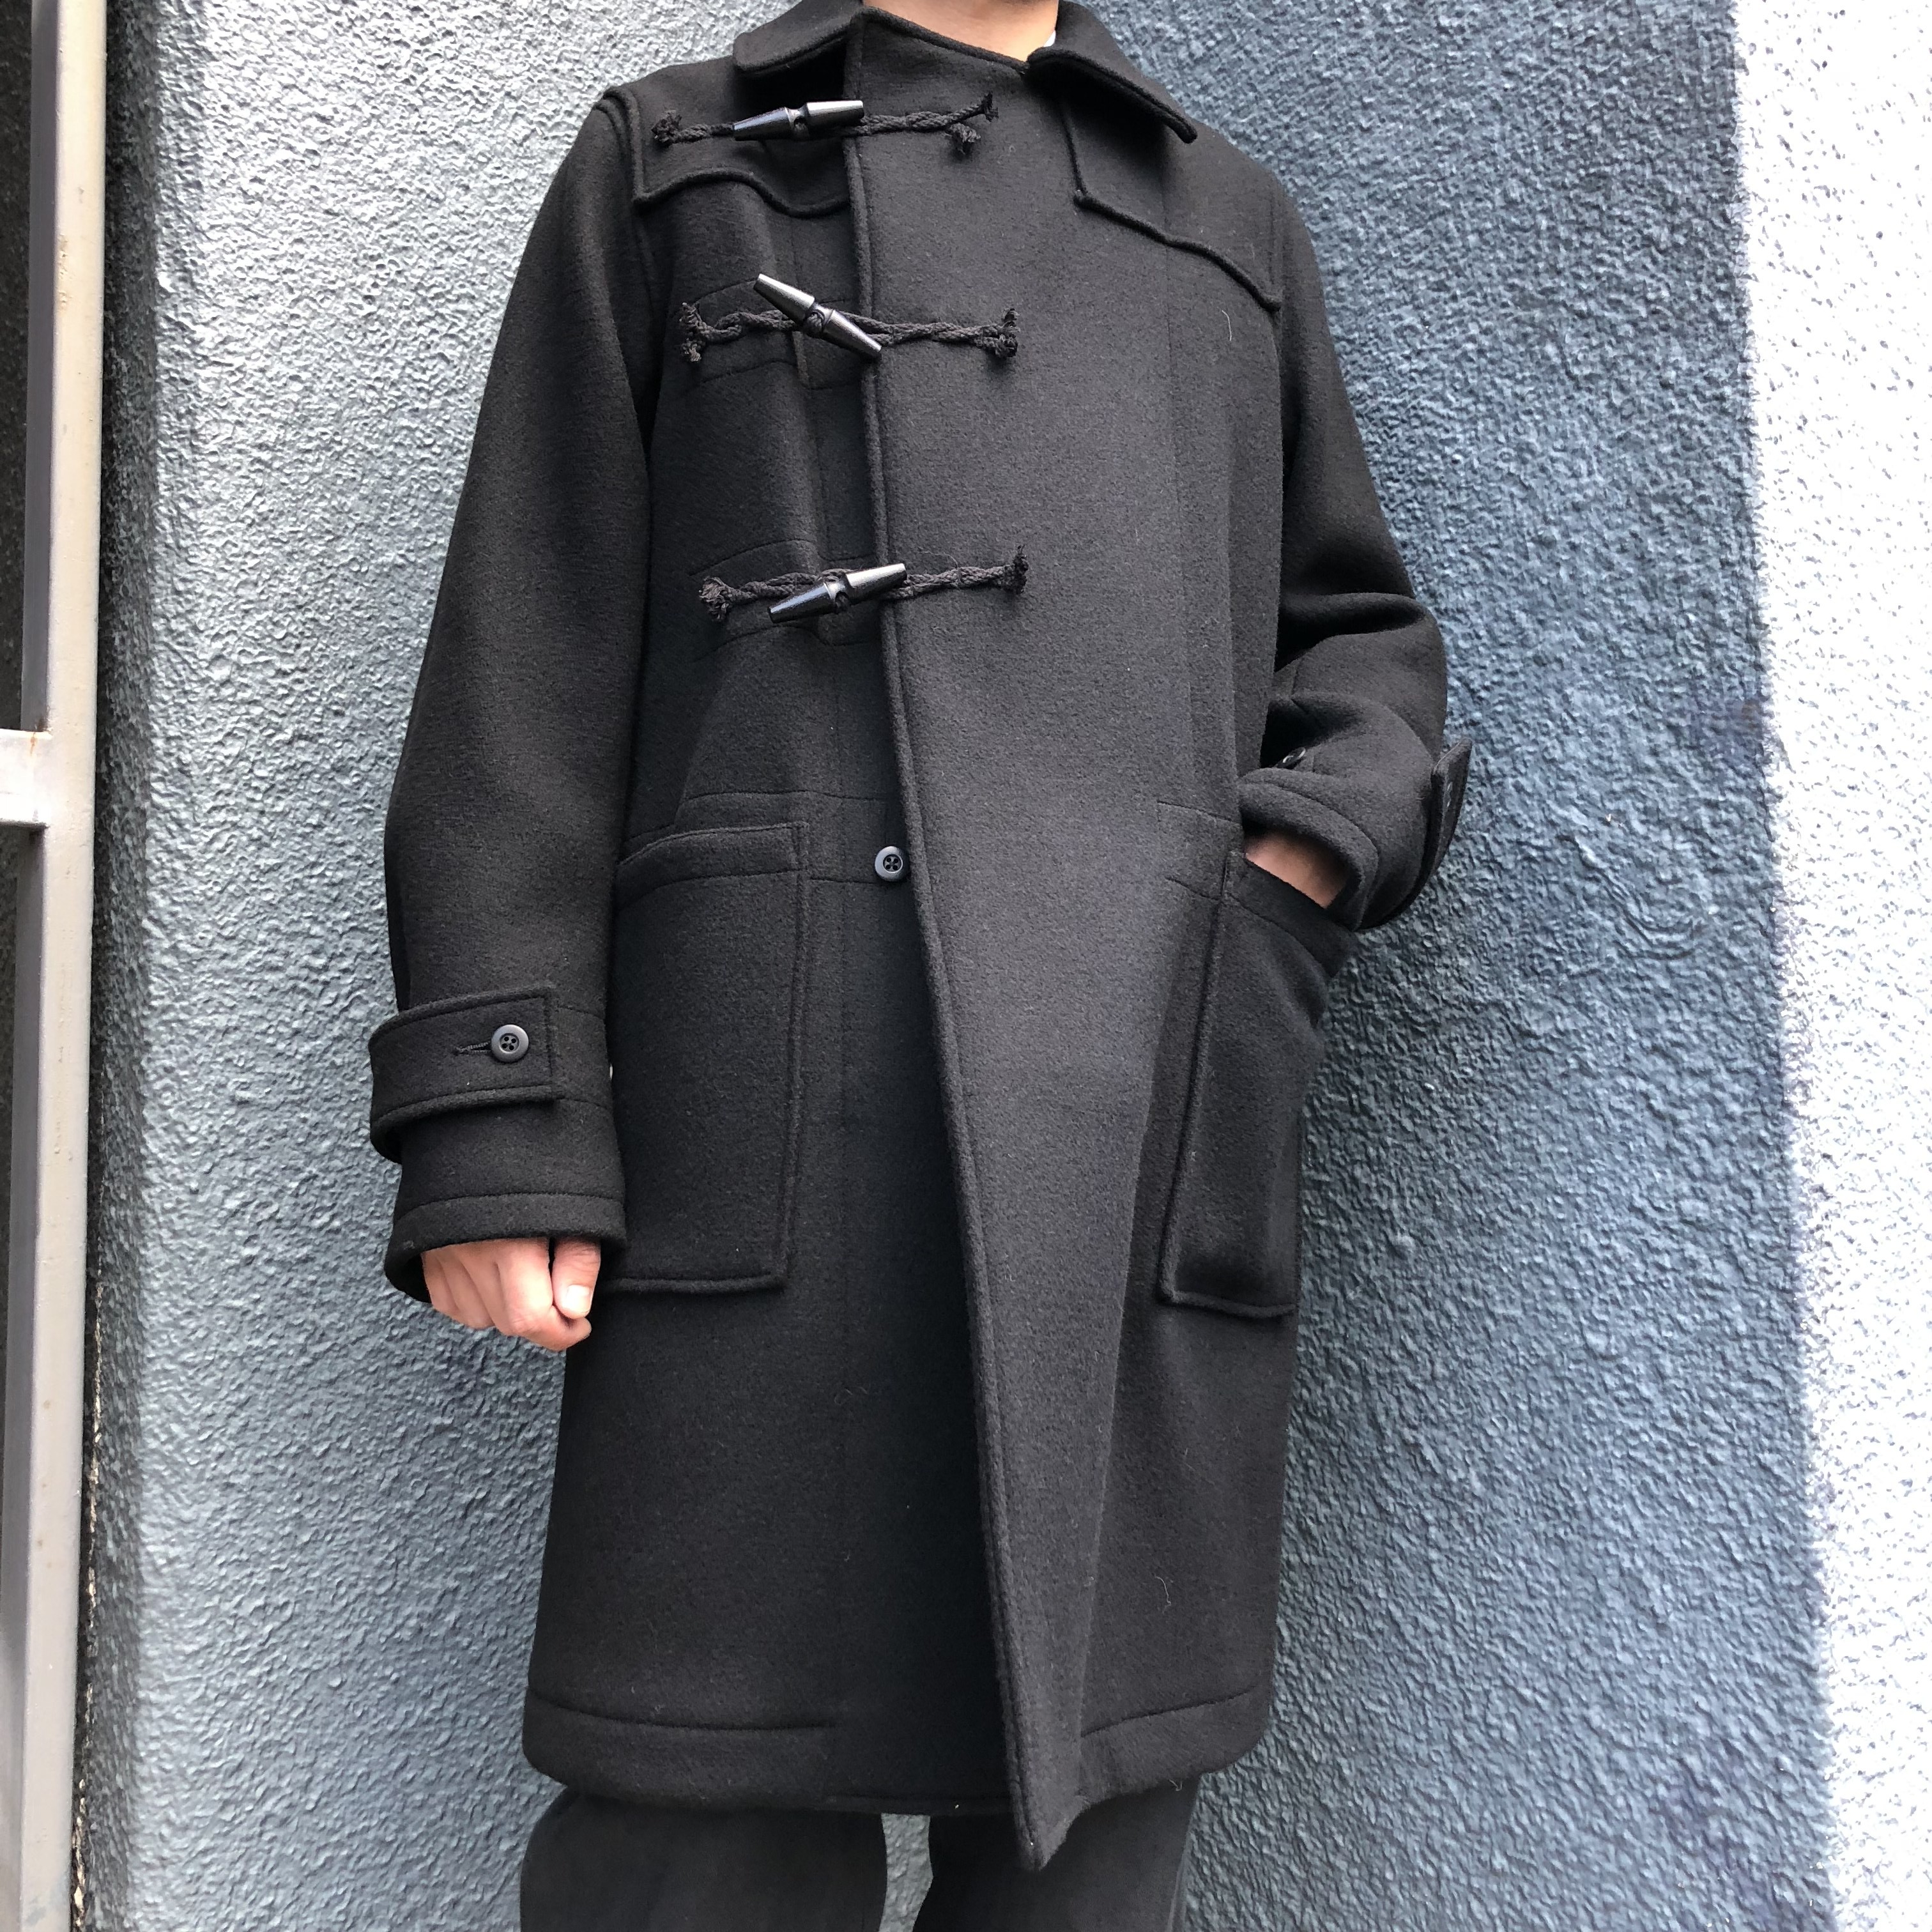 KLASICA 19AW JUST ARRIVAL | ARCH TOKYO